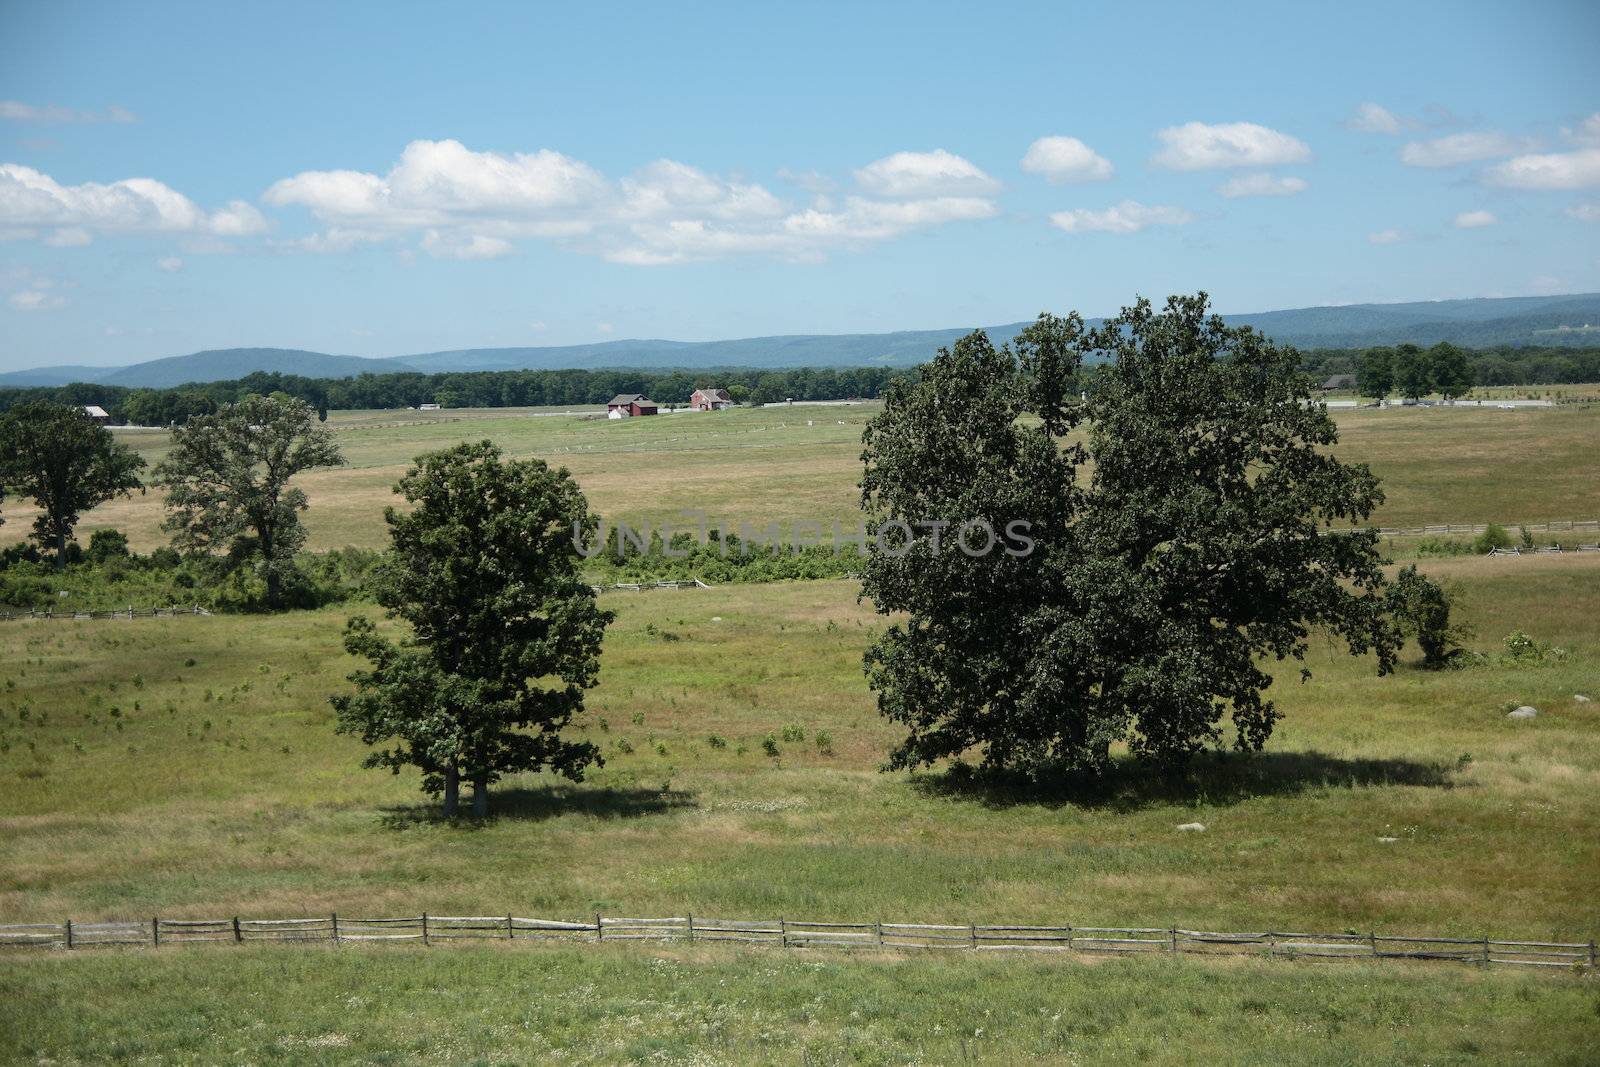 Farm and fences on battle site, as seen from Cemetery Ridge at Gettysburg National Military Park